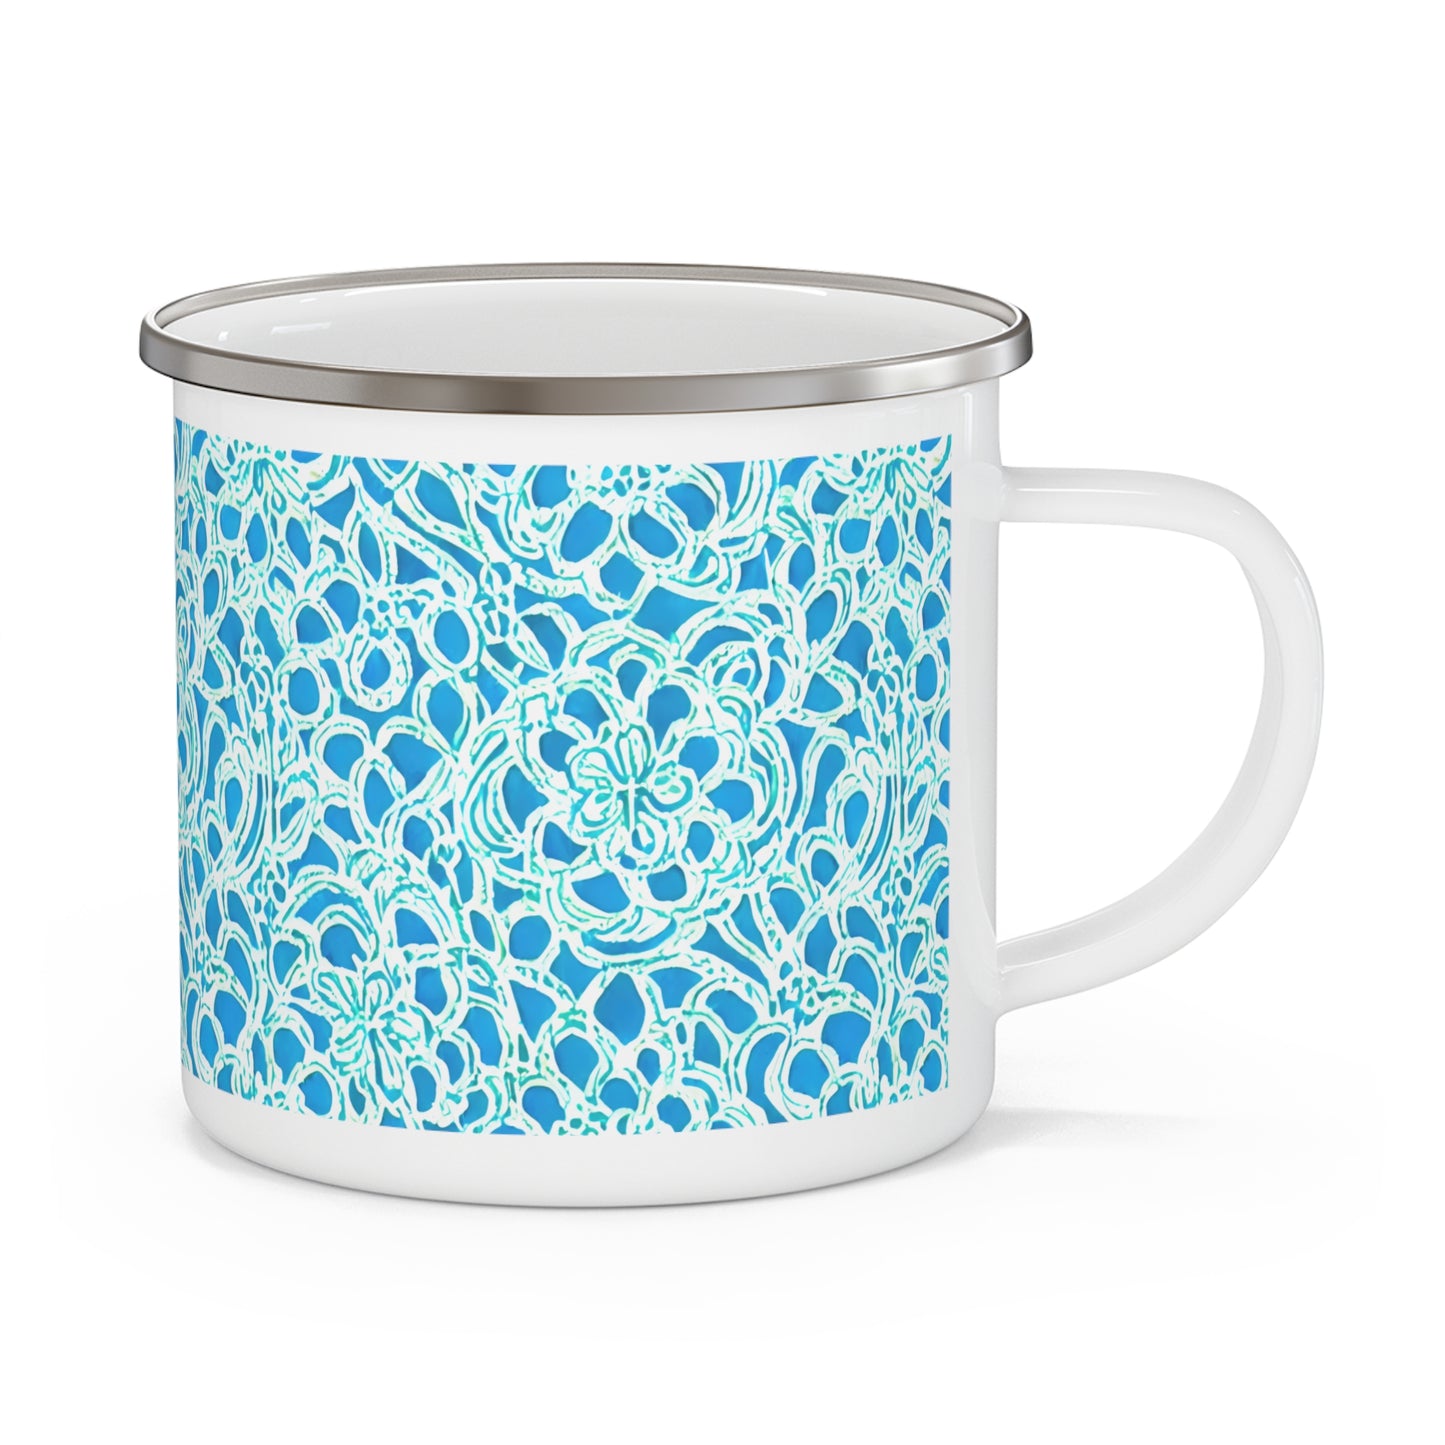 Luminous Swirls: Abstract Watercolor Floral Patterns in Lime Green and Blue 12oz Enamel Camping Mug